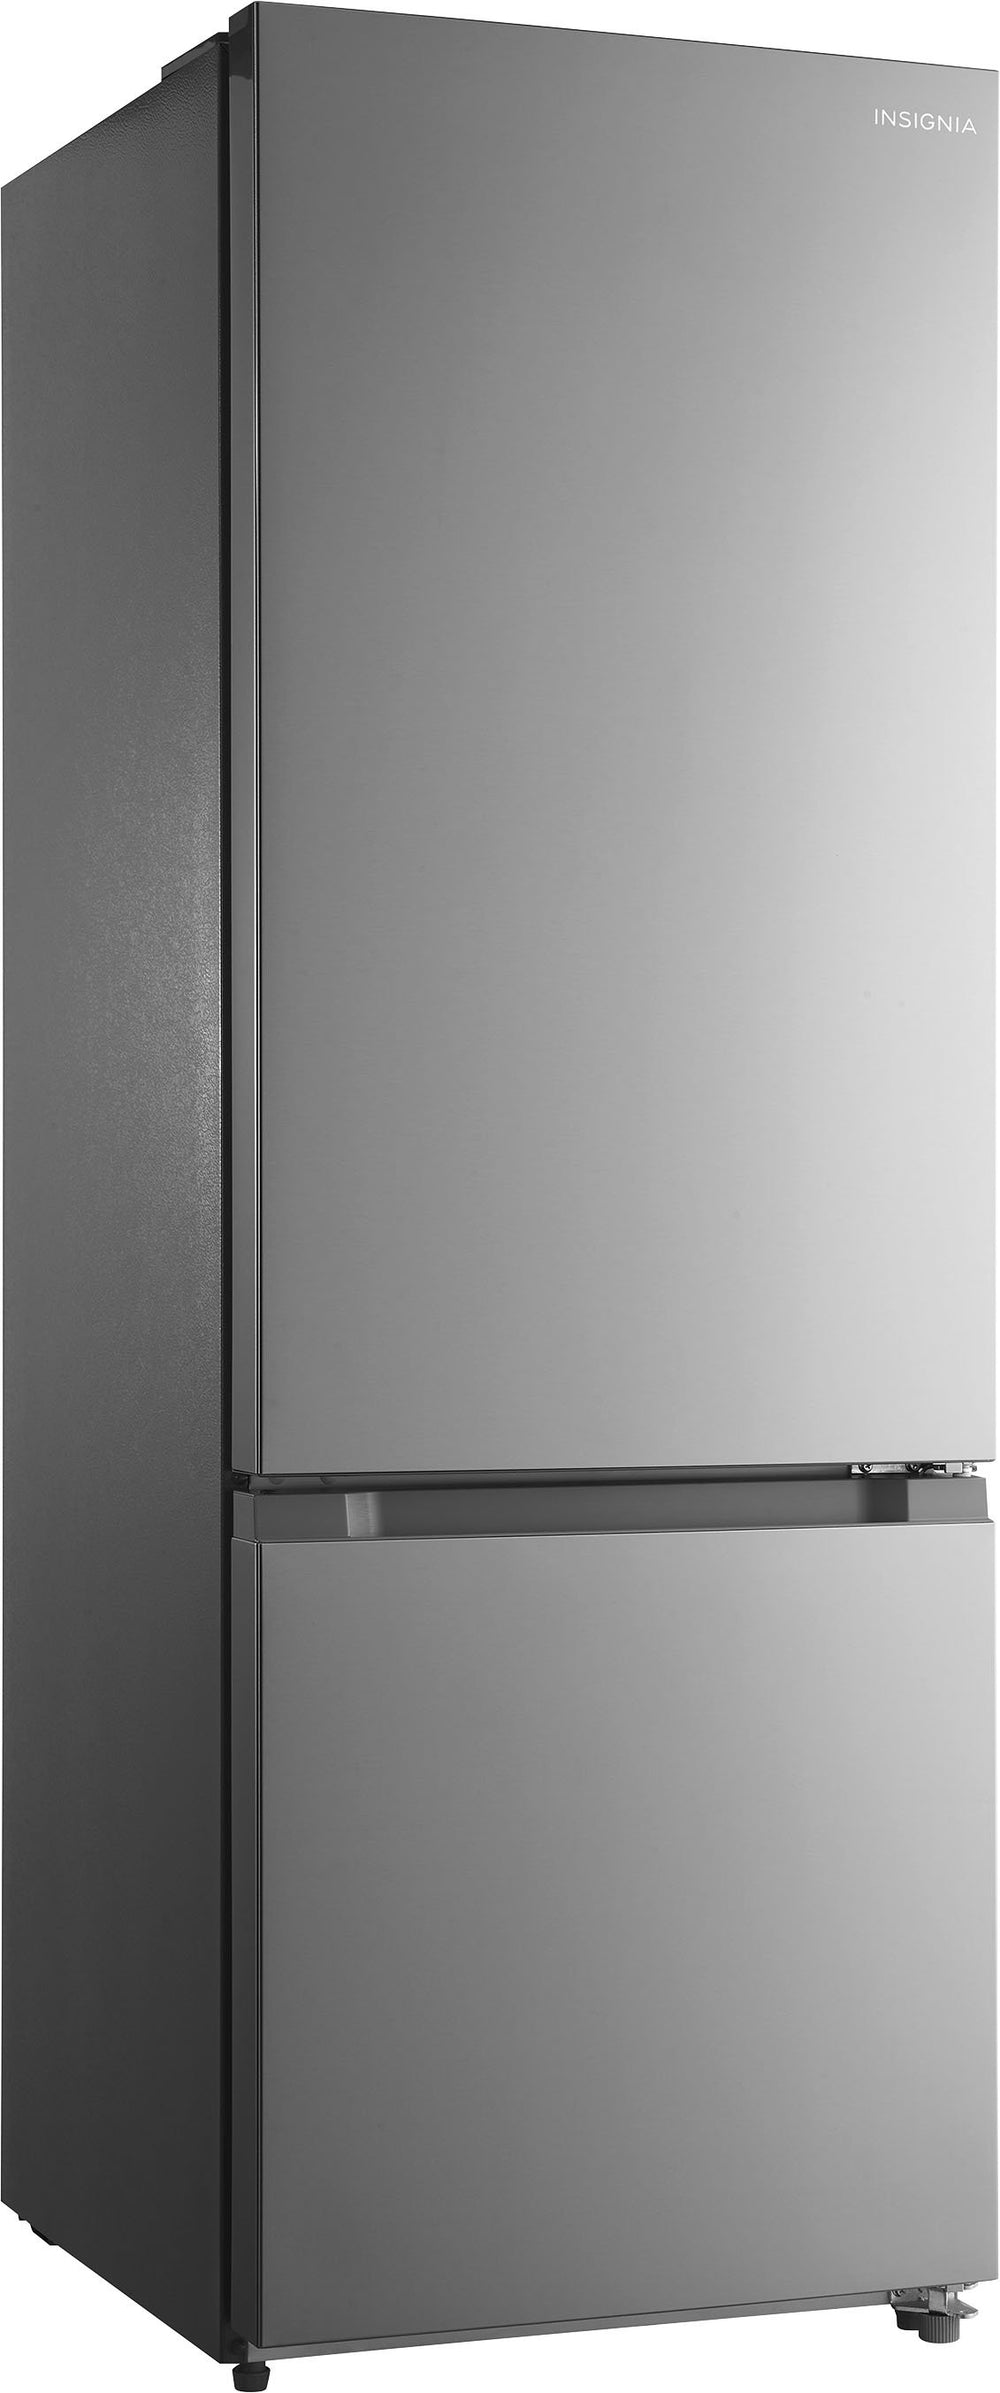 Insignia™ - 11.5 Cu. Ft. Bottom Mount Refrigerator - Stainless steel_1